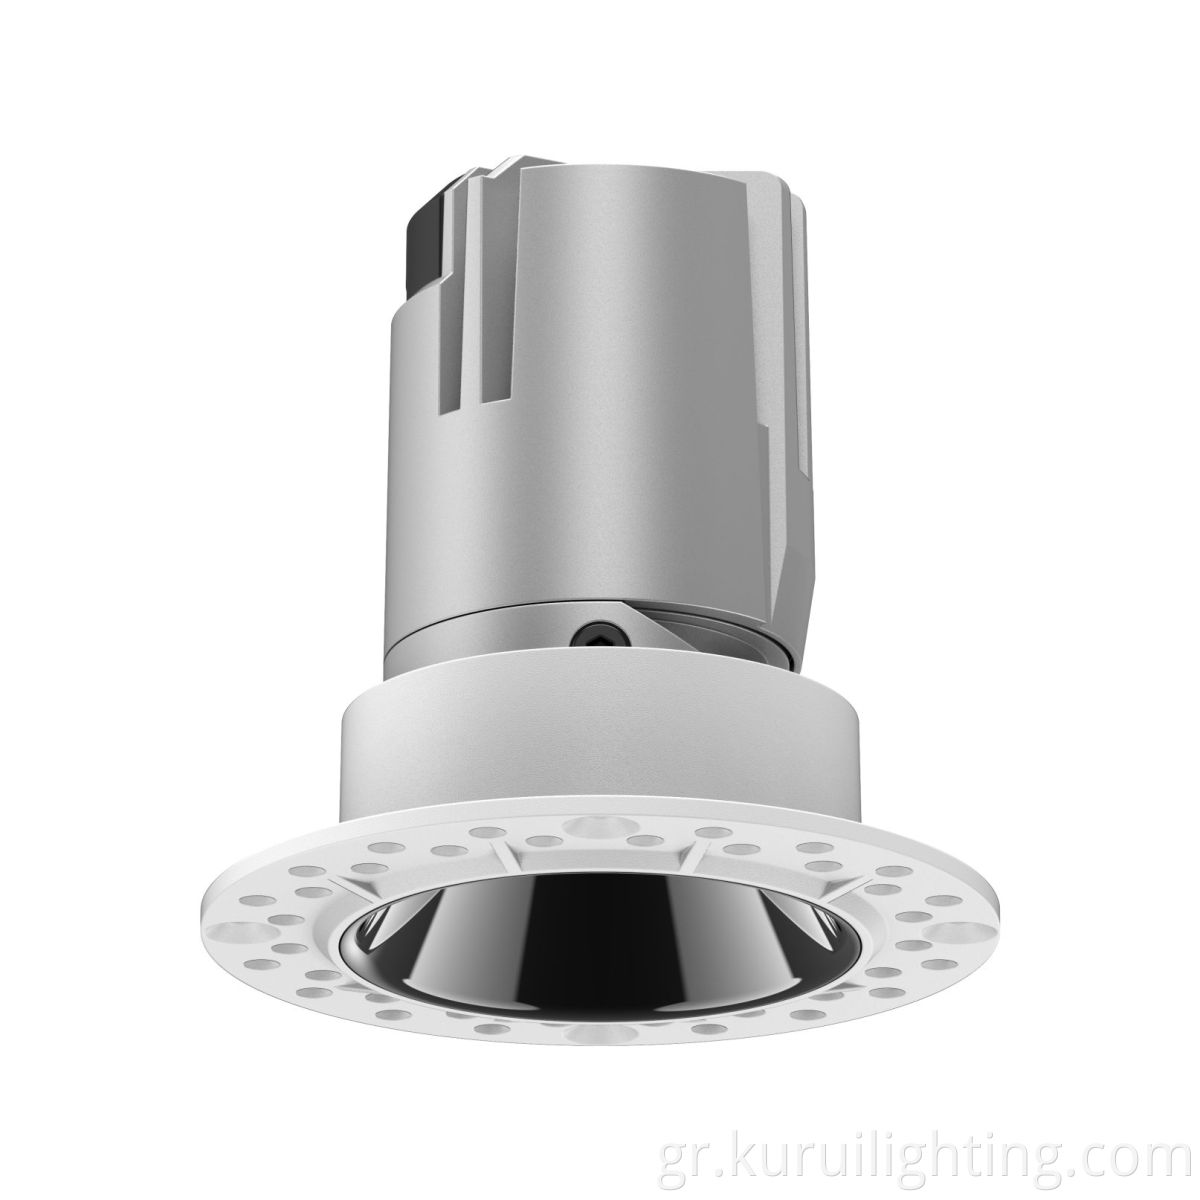 Endlessness Recessed Led Hotel Downlight